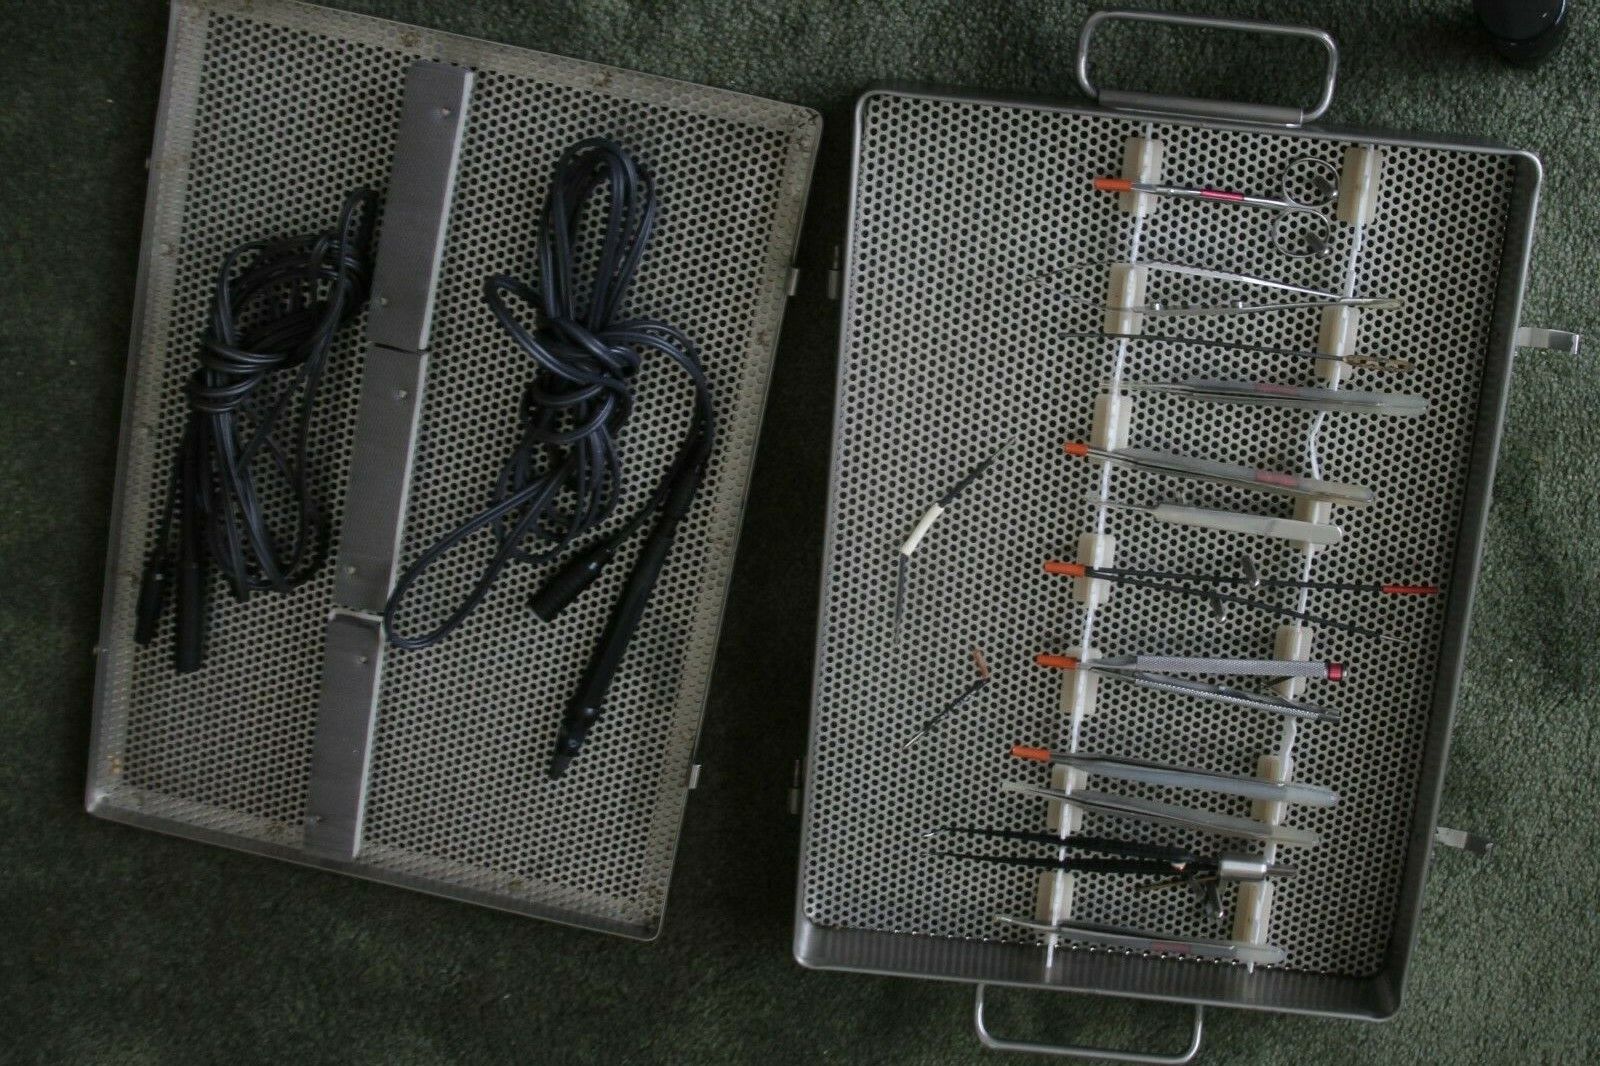 Surgical instrument set   For microsurgical use   Autoclave tray